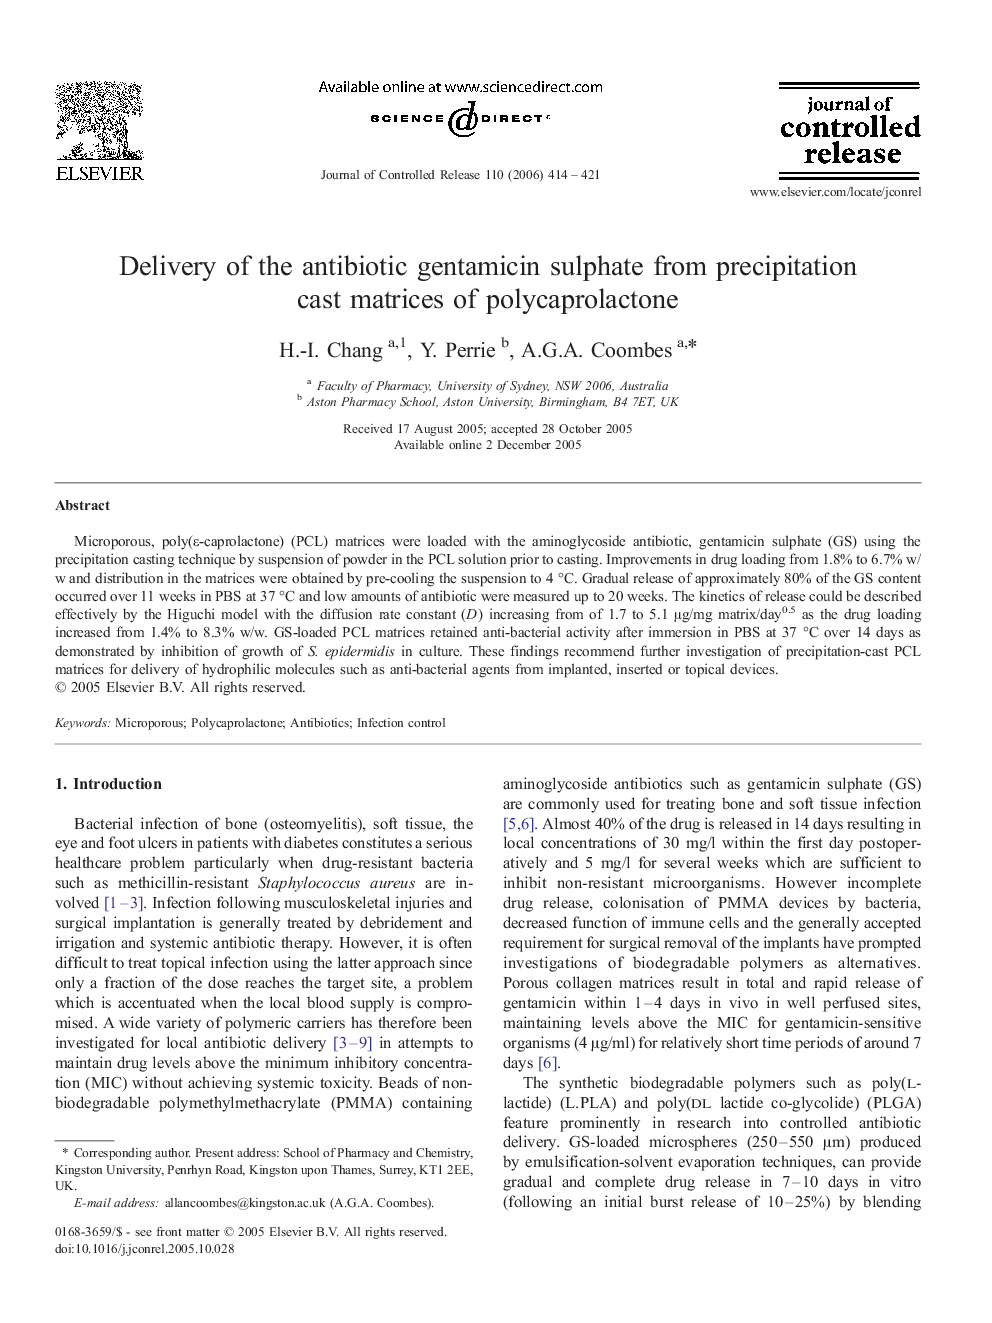 Delivery of the antibiotic gentamicin sulphate from precipitation cast matrices of polycaprolactone